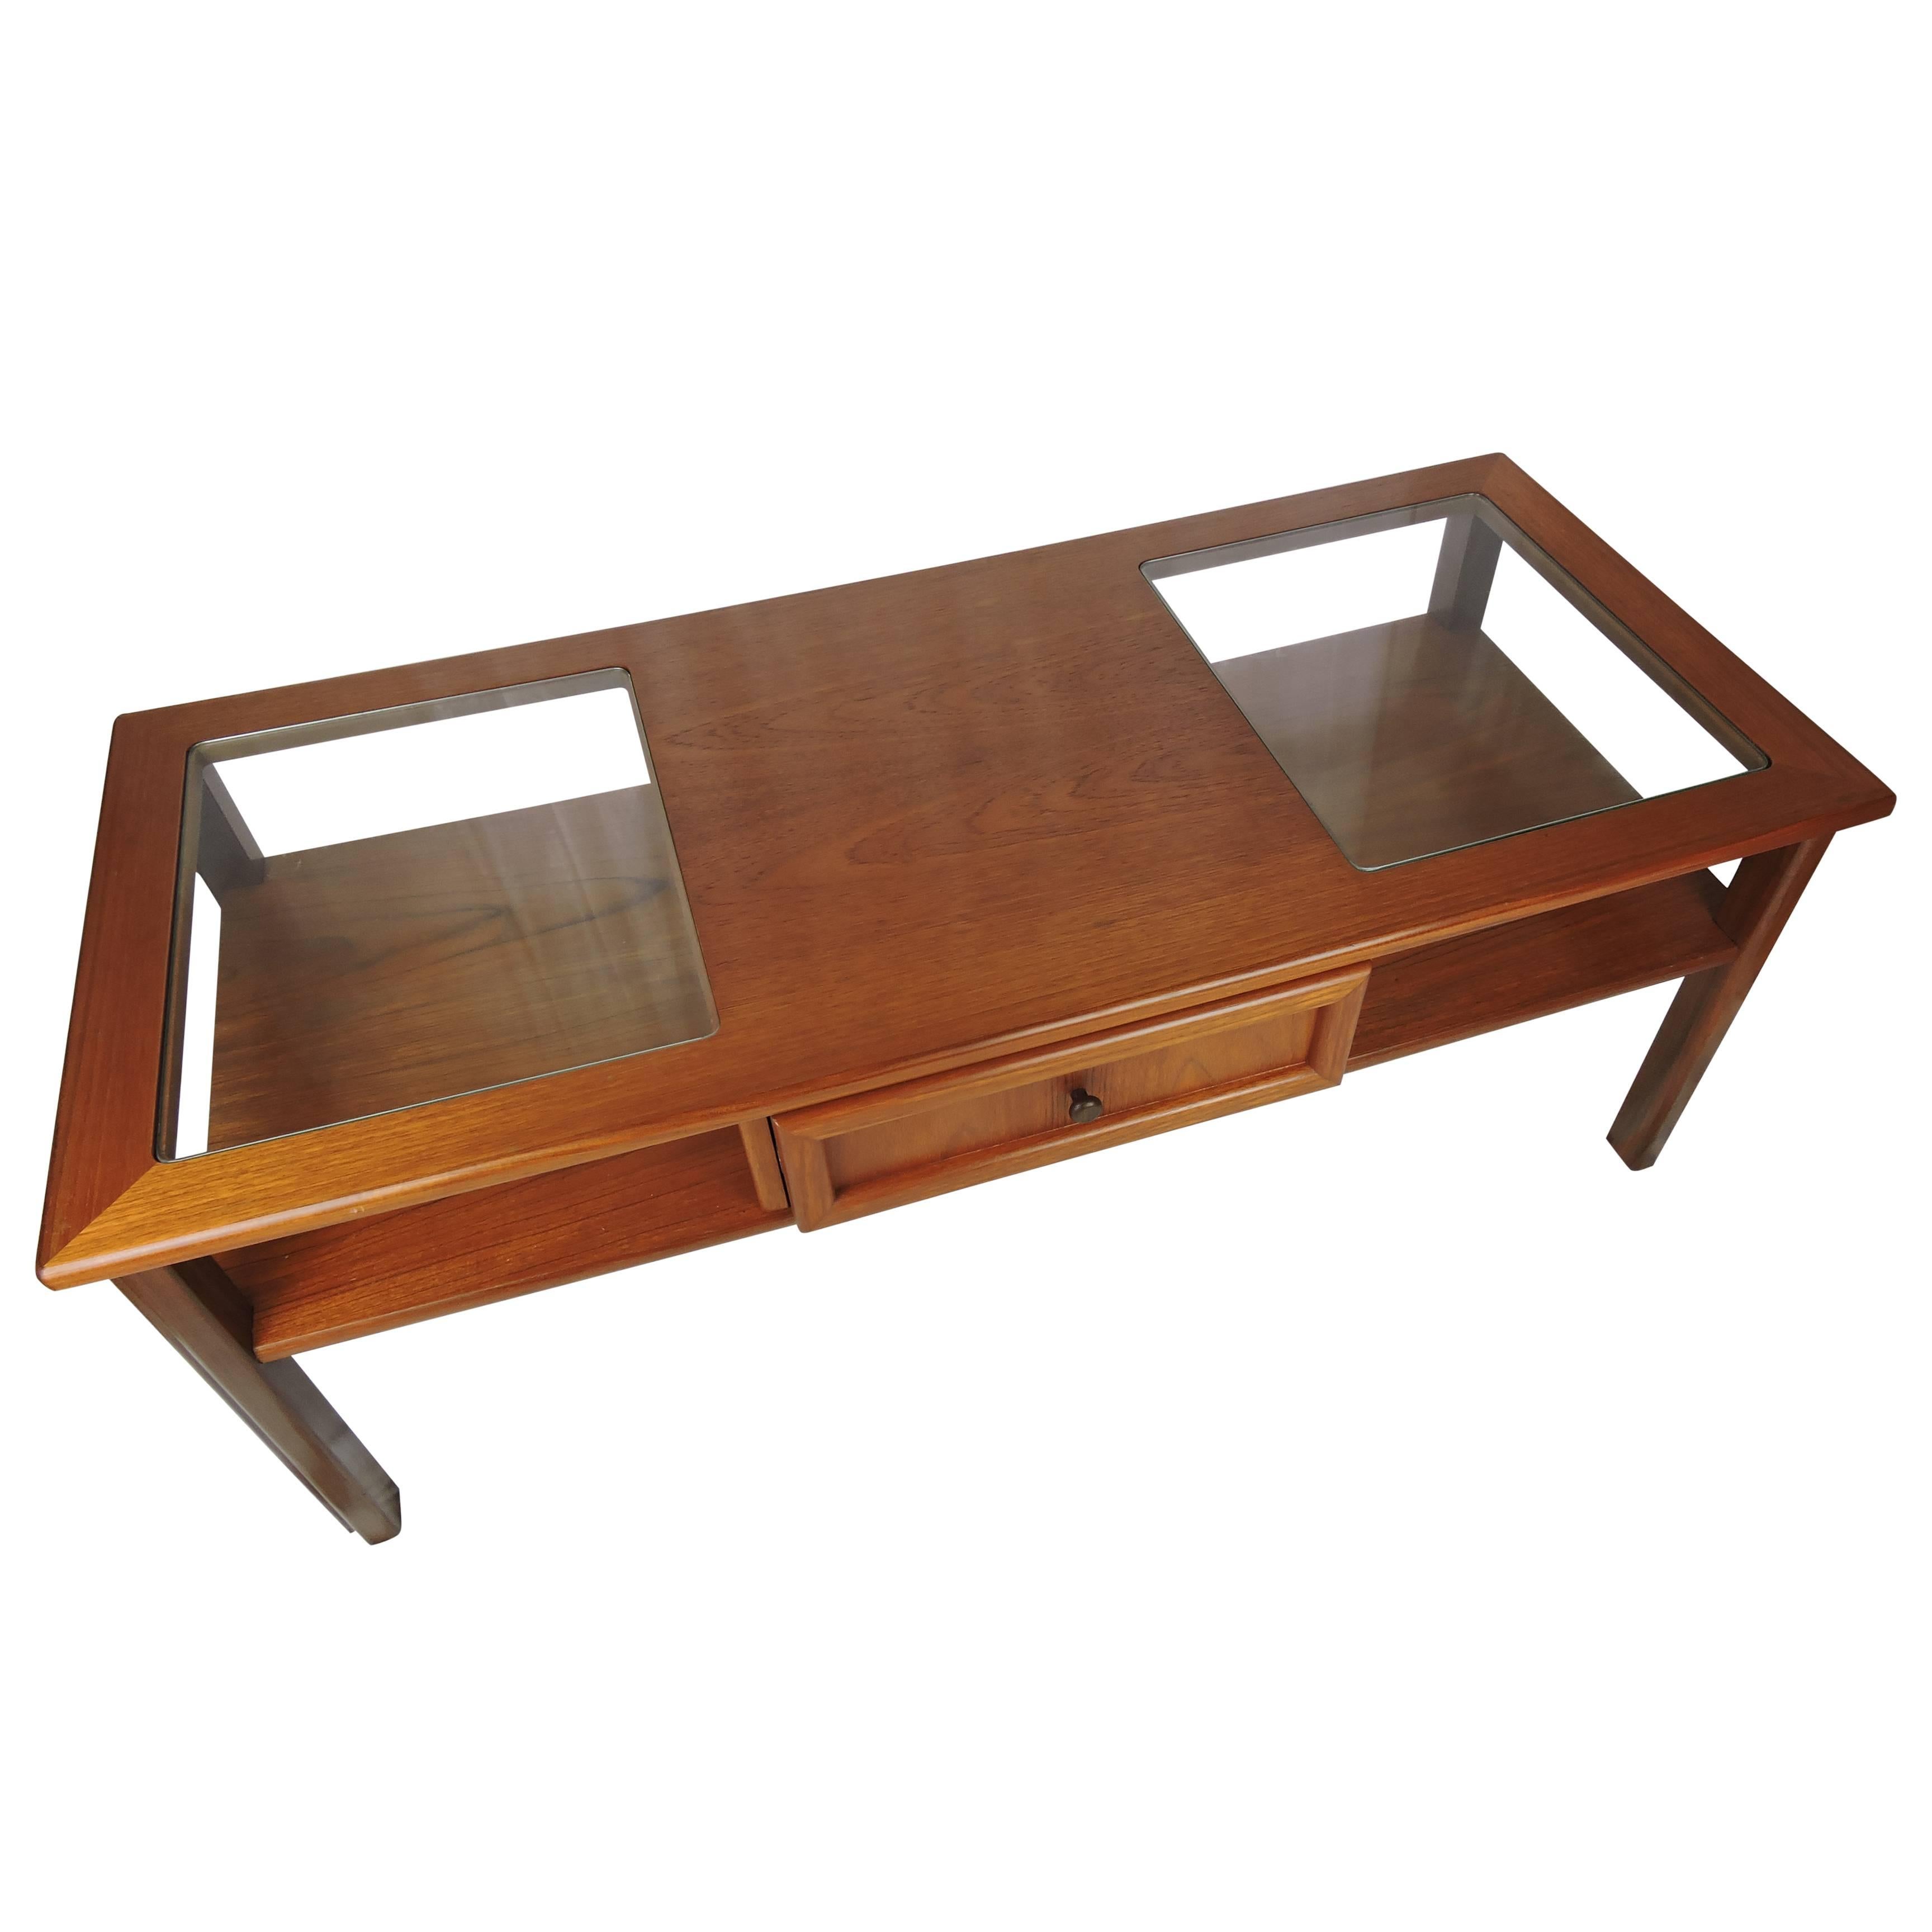 A British G-Plan teak low coffee table with a single central frieze drawer opening at both ends. It features a glass topped section over shelves at either end. Table stands on shaped legs.